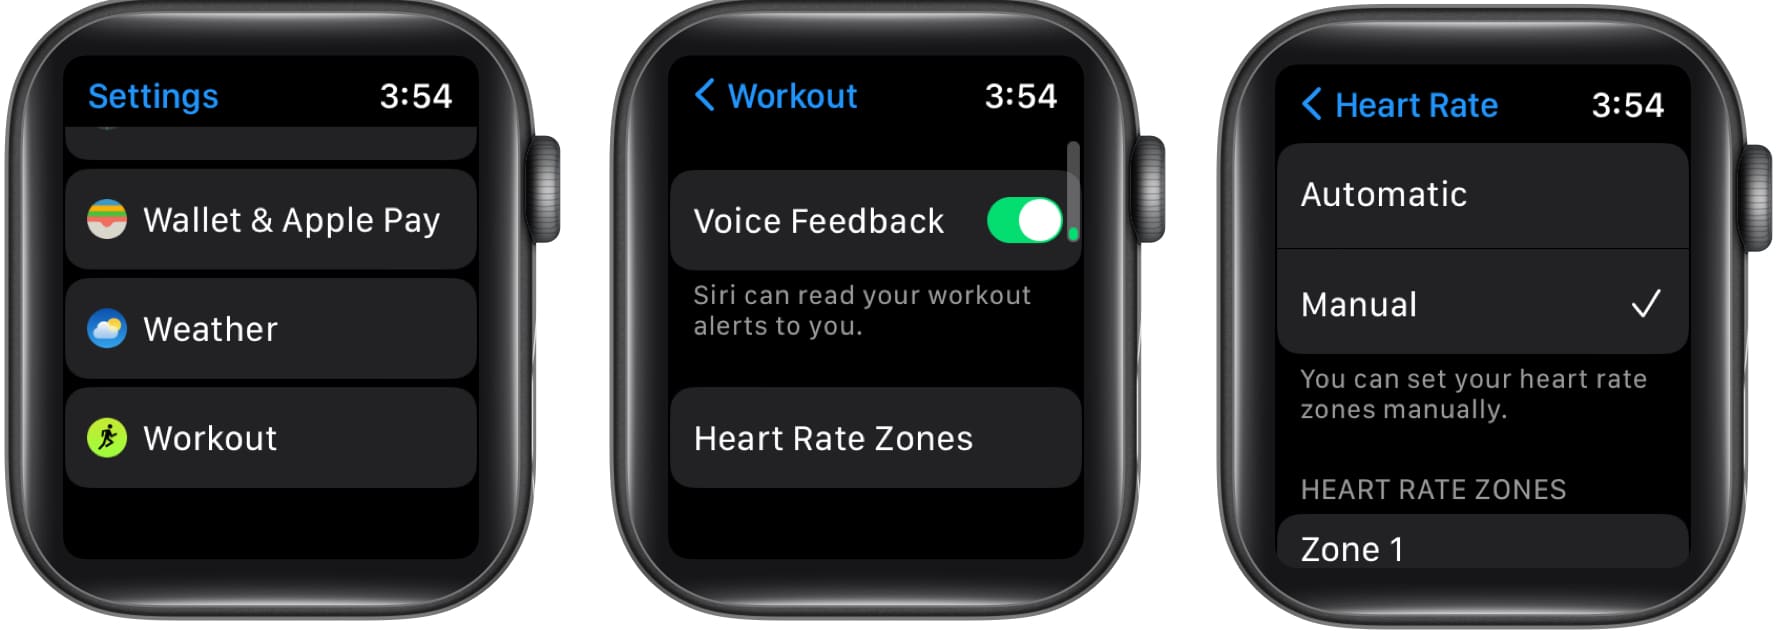 Tap Manual in Heart Rate on World Watch